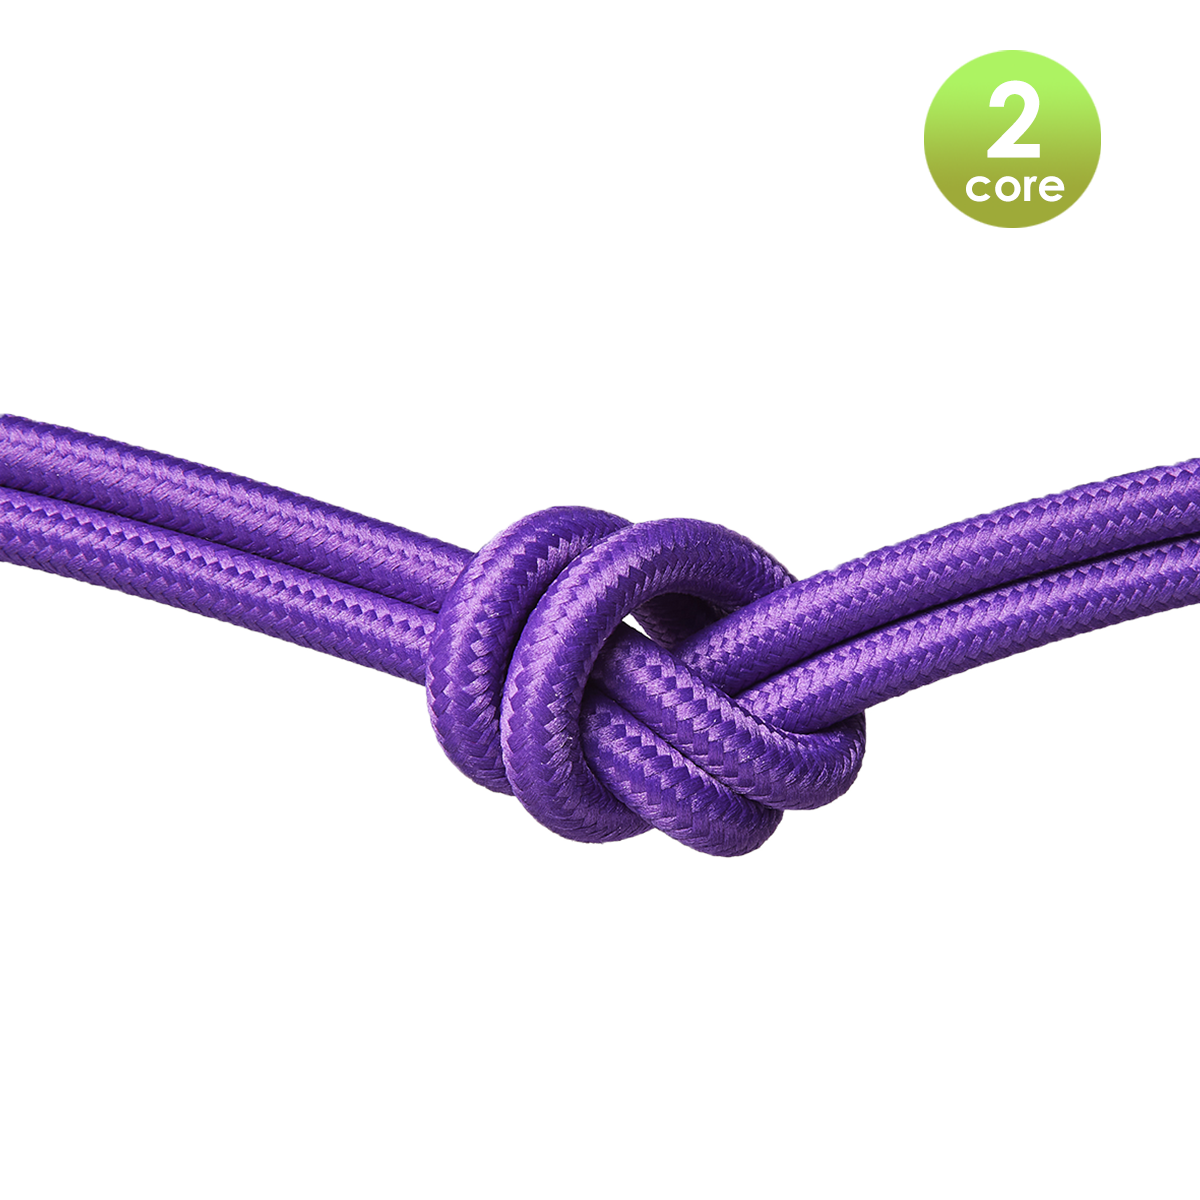 Tangla lighting - TLCB01004PP - Fabric cable 2 core - in glossy purple